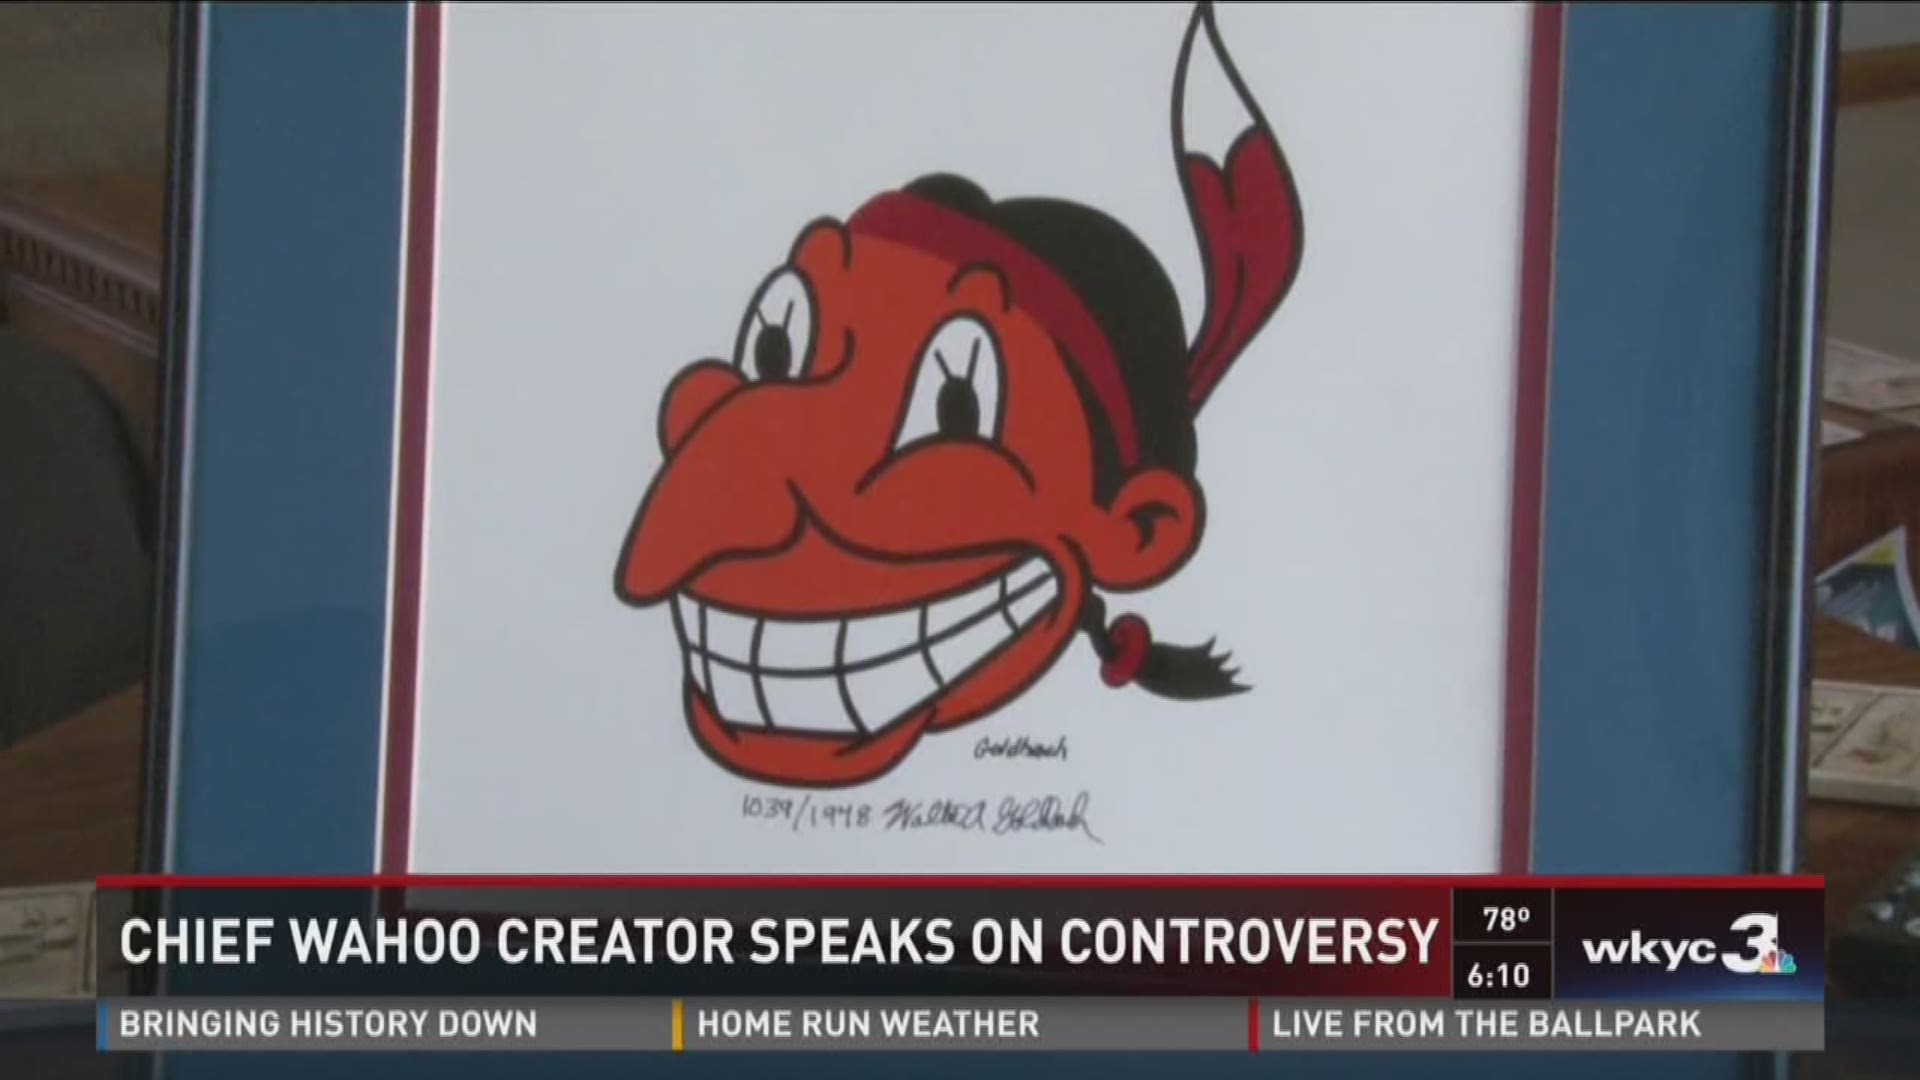 Original Wahoo creator reflects on controversy